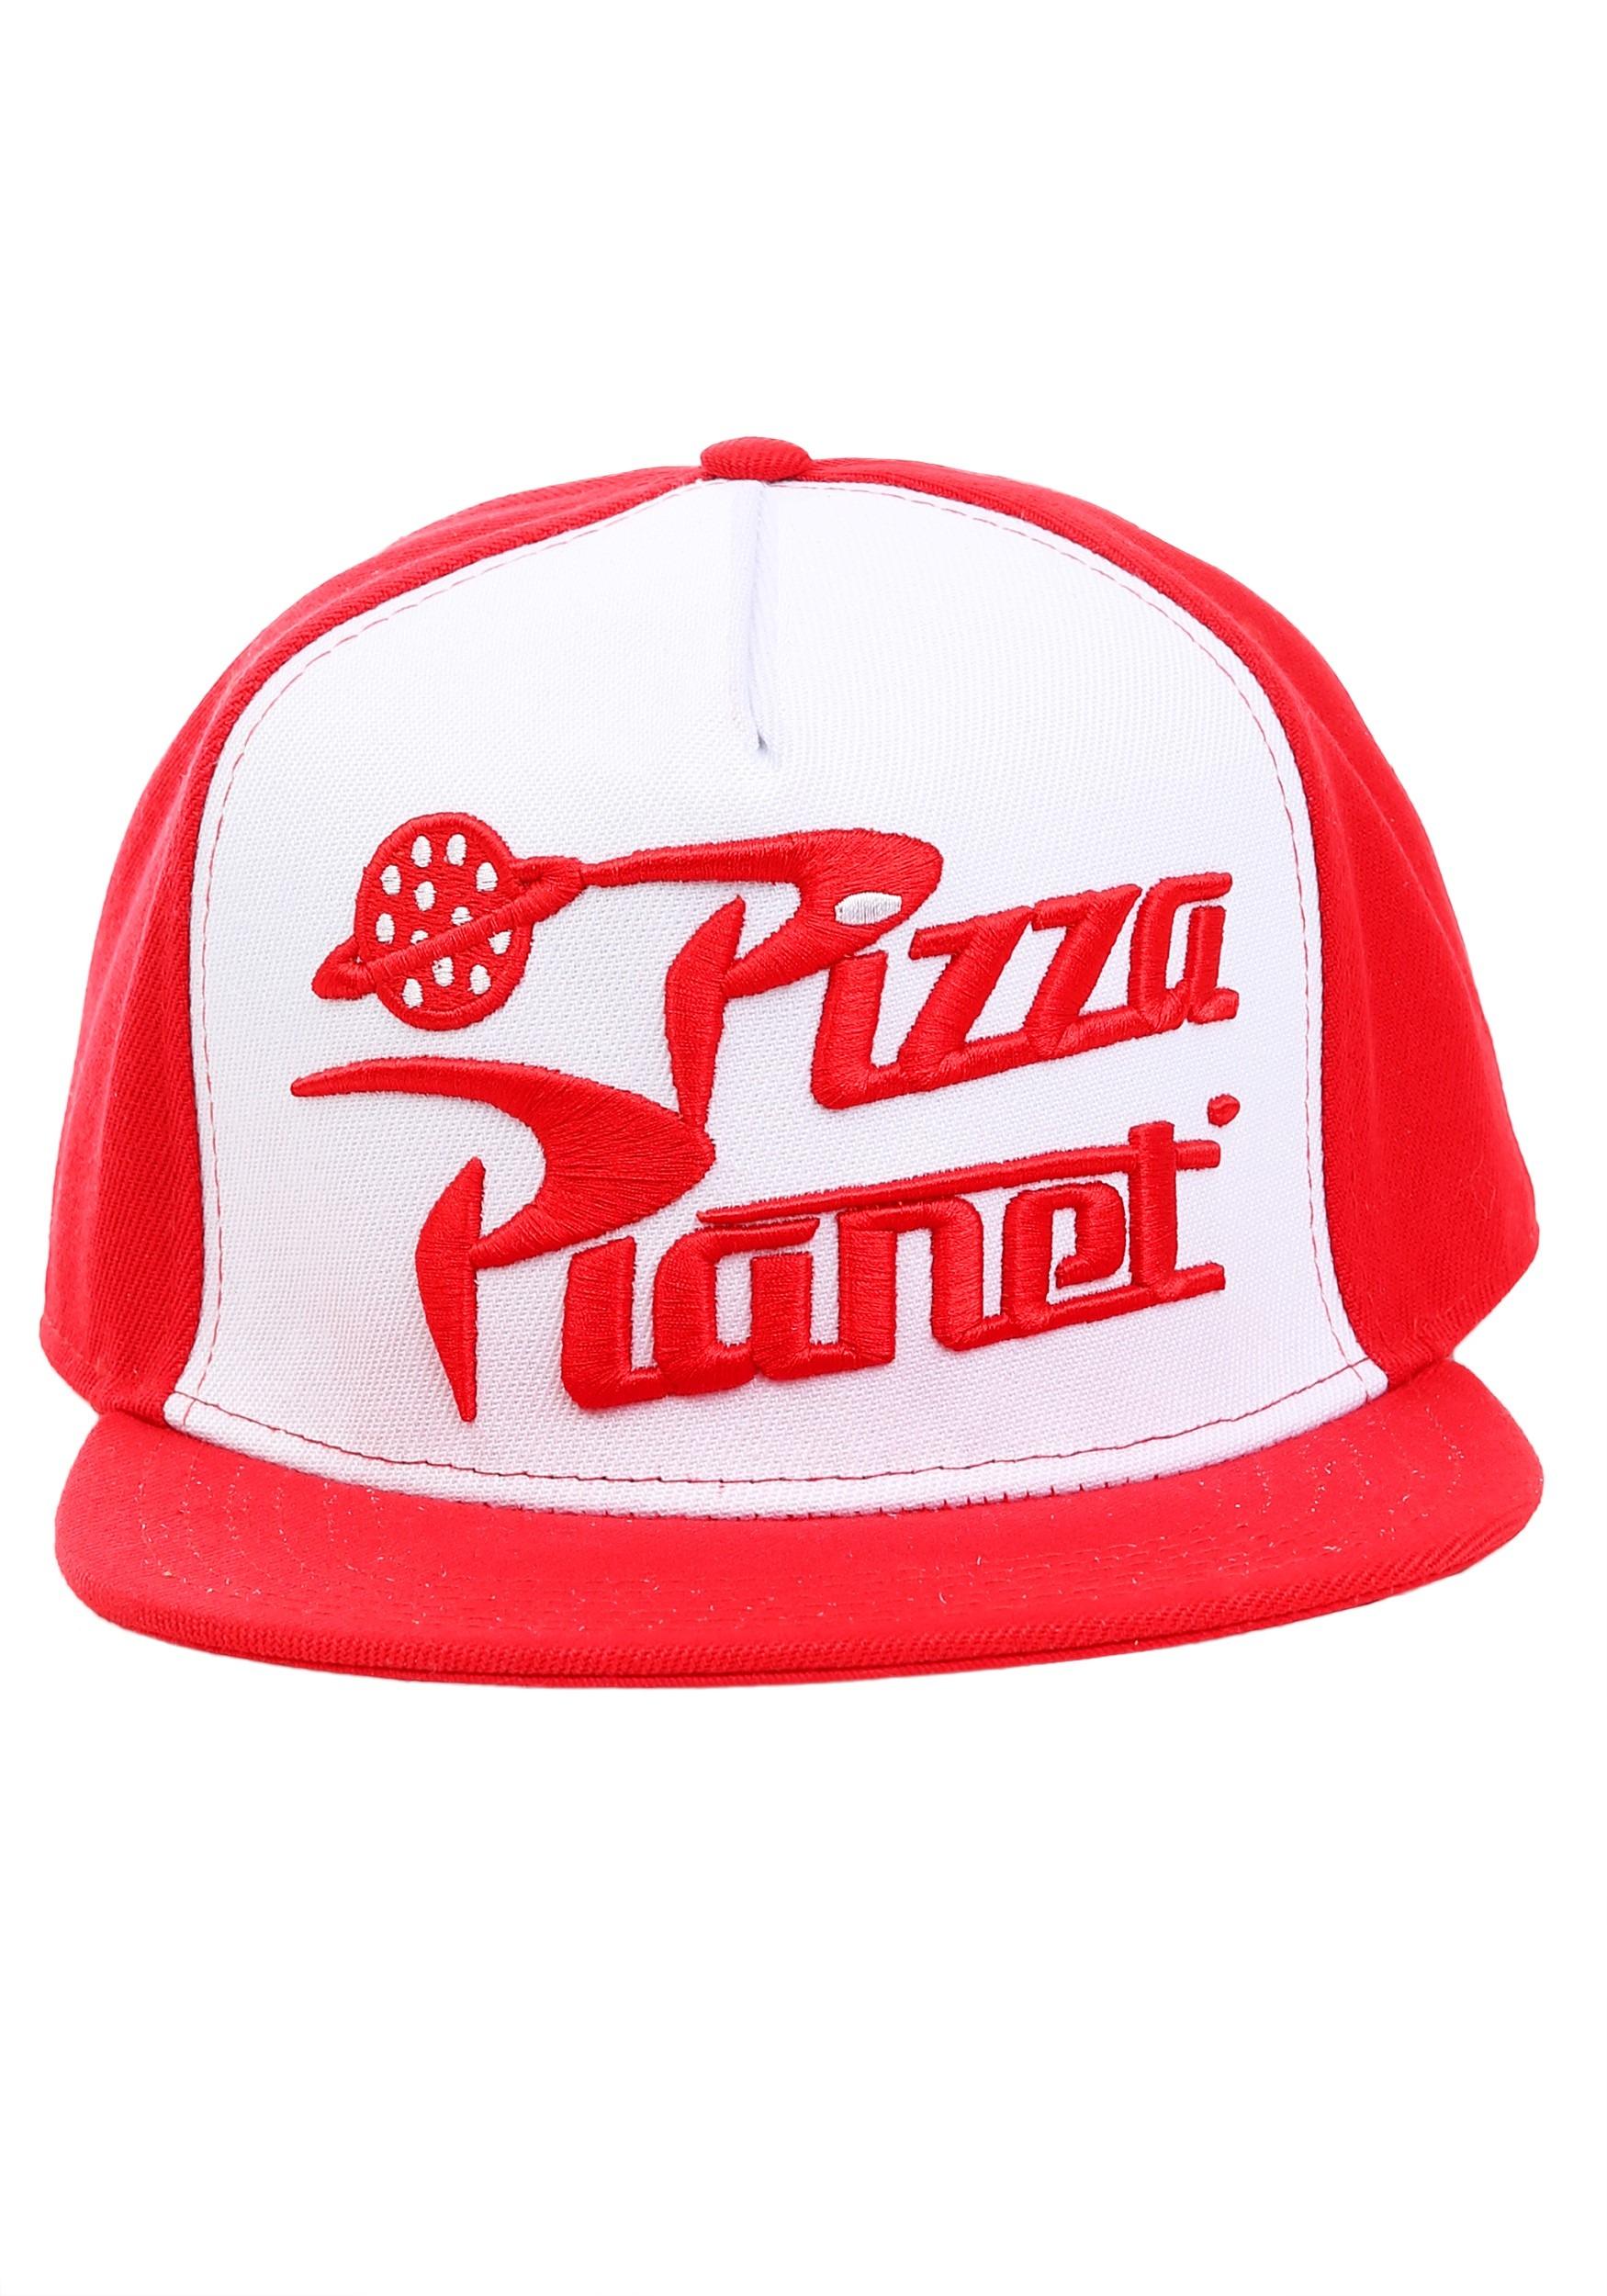 Pizza Planet Logo - Toy Story Pizza Planet Snapback Adult Hat